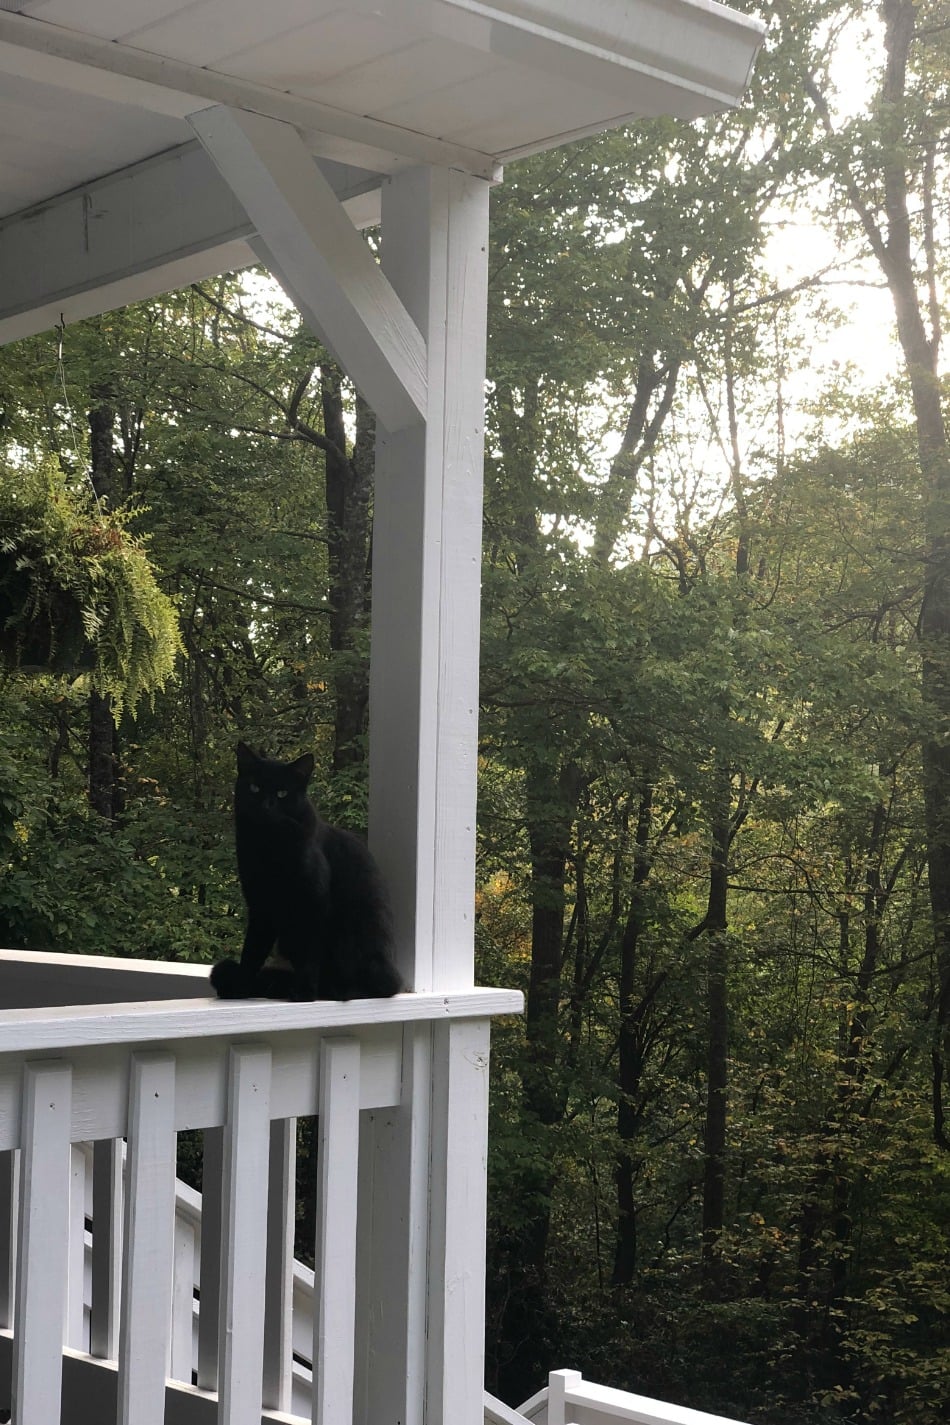 Black Cats and Superstitions | Growing Up Herbal | Meet our black cat, Oliver. According to superstition, black cats are thought to bring bad luck, but do they?